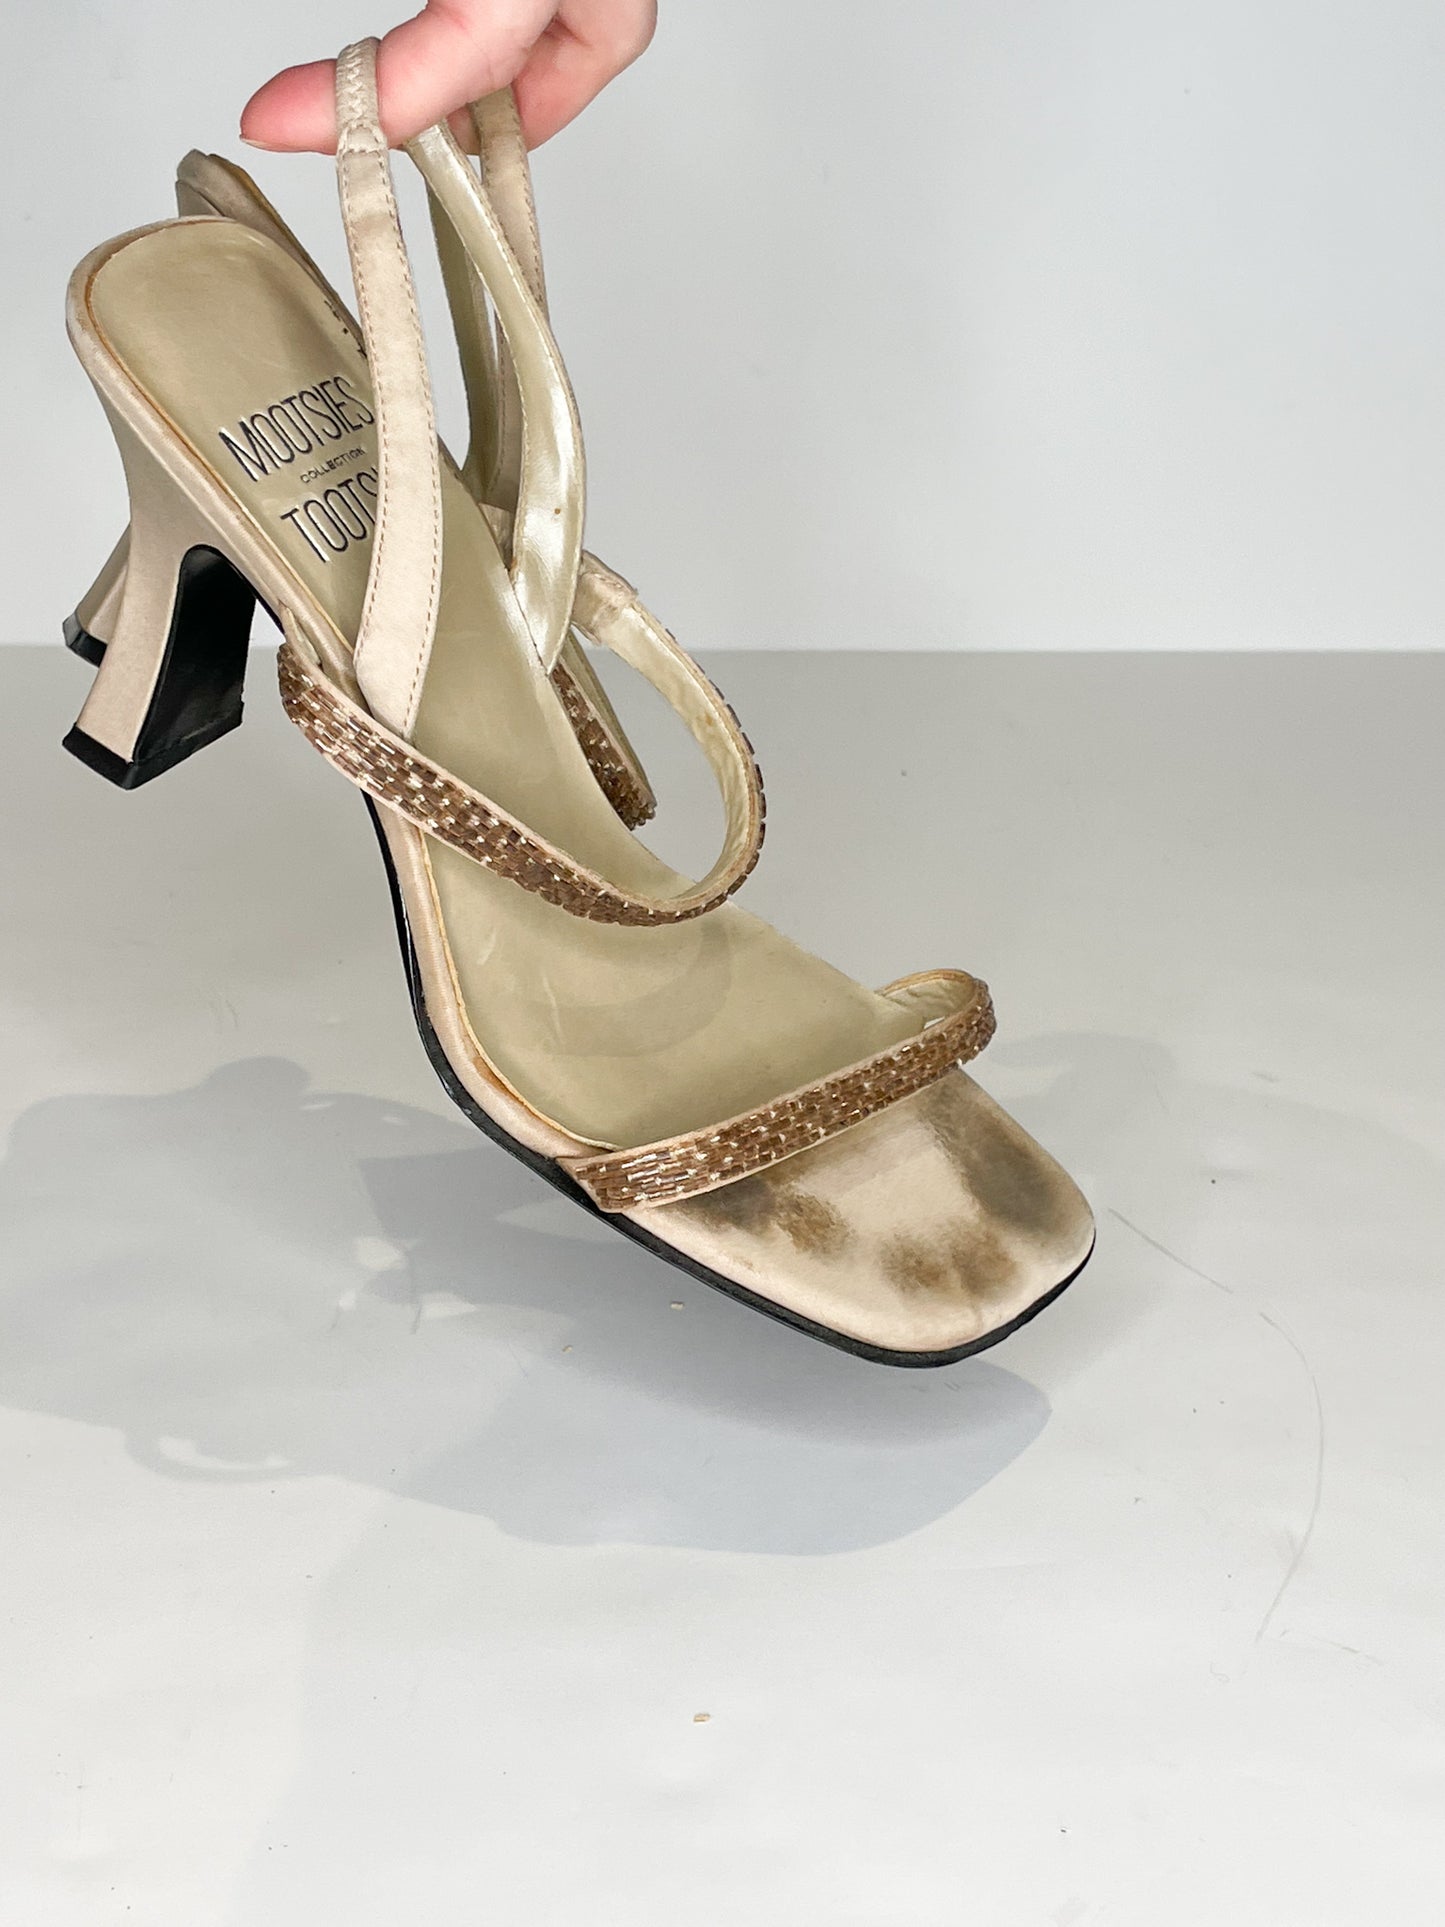 Mootsies Tootsies Soft Gold Satin Strappy Square Toe 3.25" Heels - Size 6.5